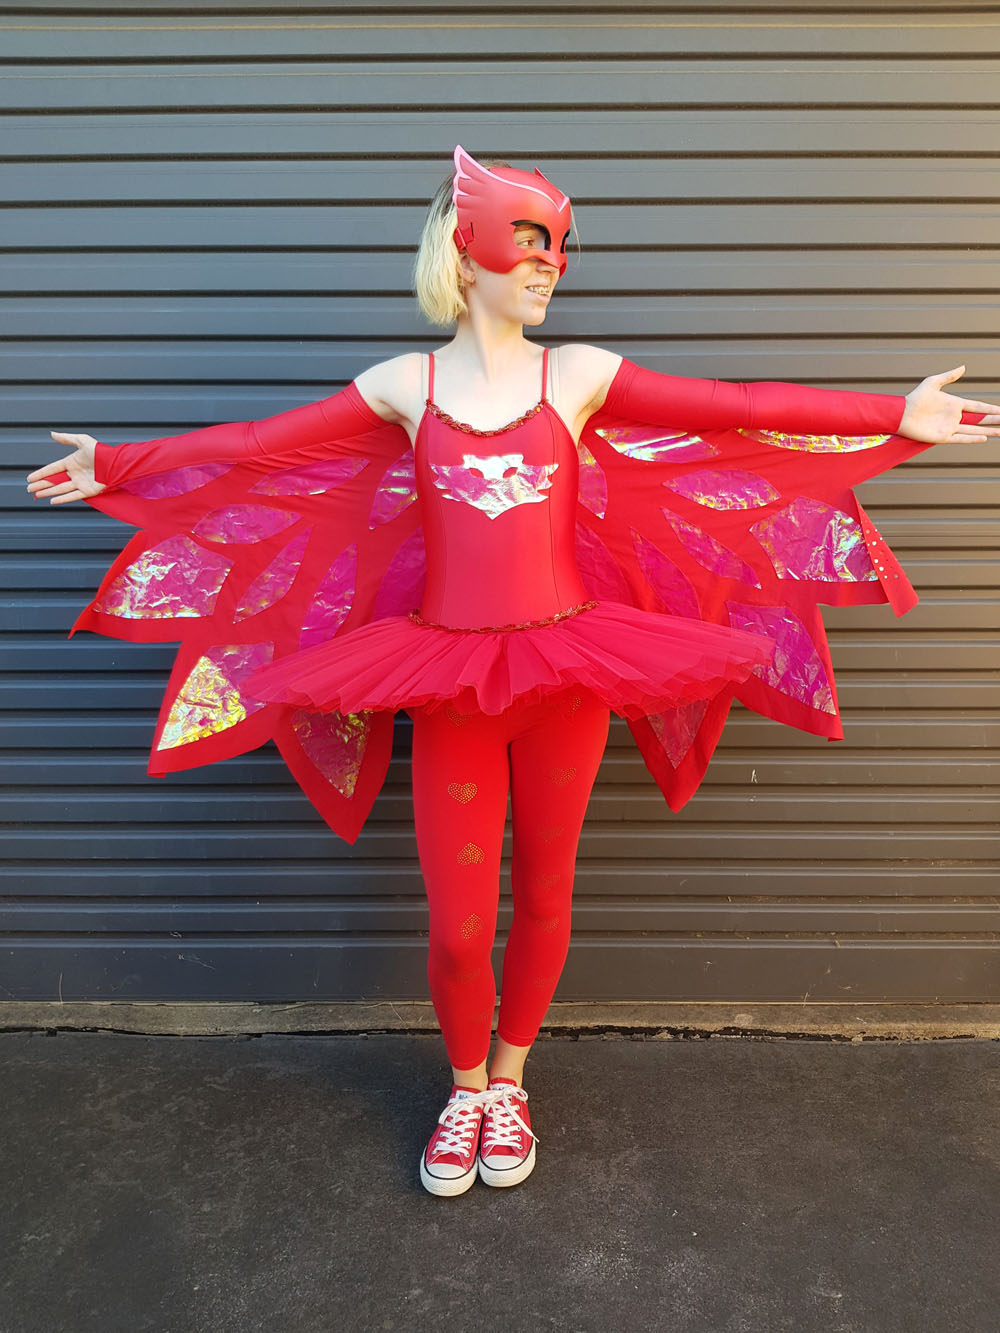 Easy PJ Masks Owlette Wings | No sew or sew, 2 method TUTORIAL | Now thats Peachy